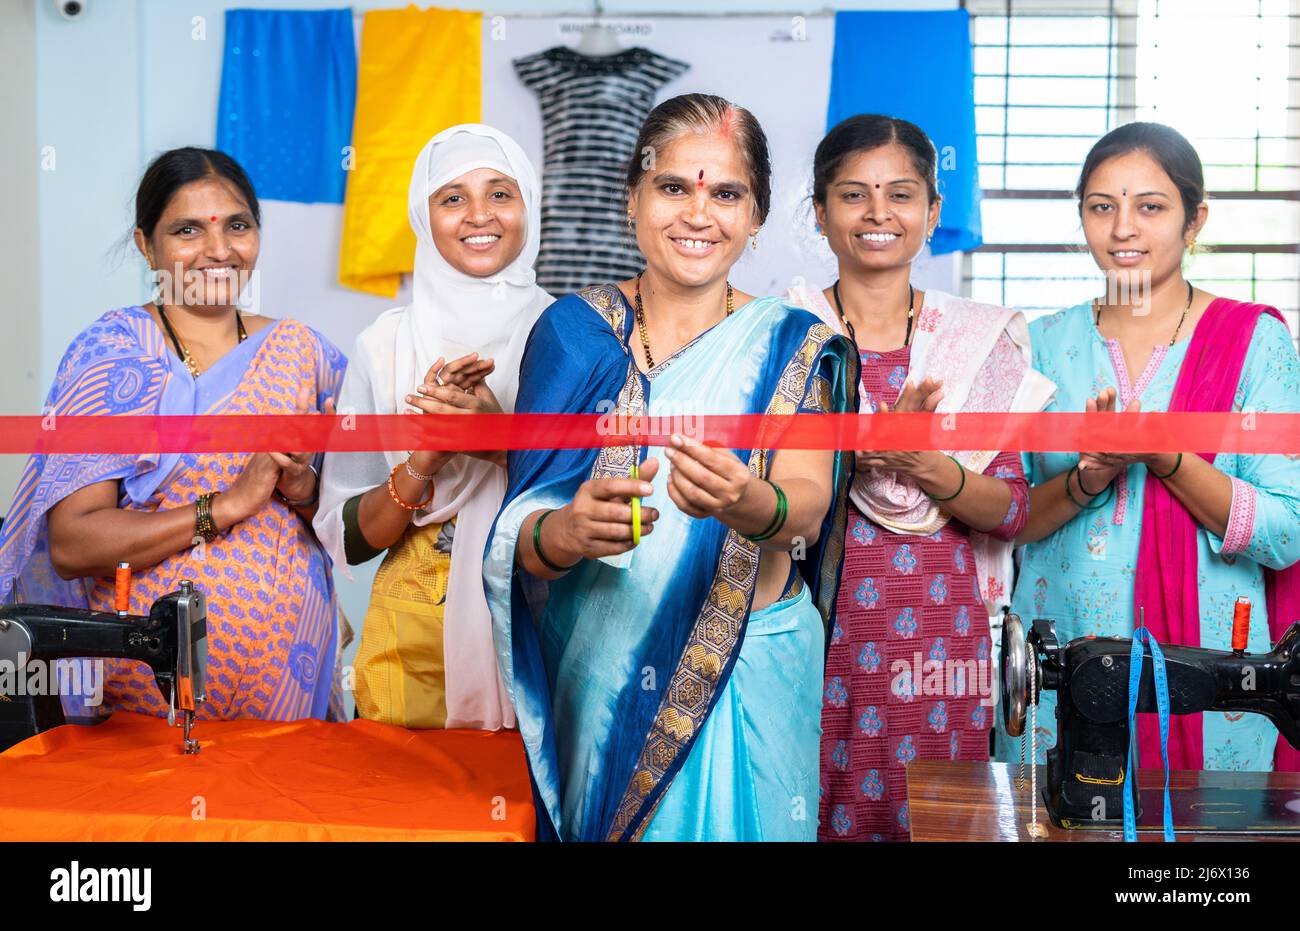 Indian woman starting new garments or tailoring small business by ribbon cutting while workers clapping from behind - concept of inspiration Stock Photo